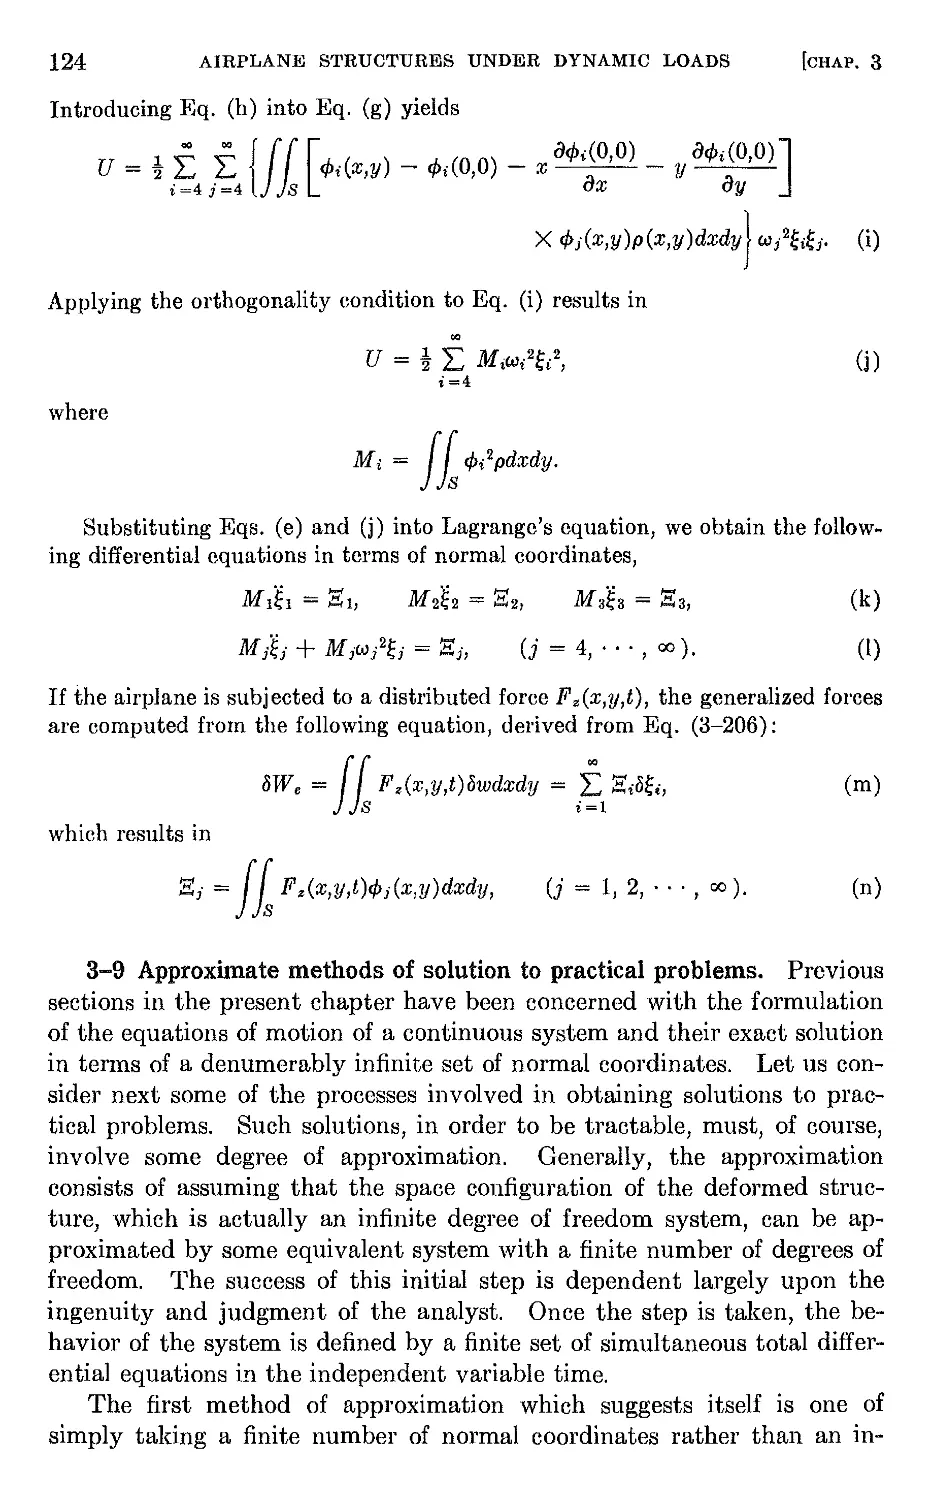 3.9 Approximate methods of solution to practical problems